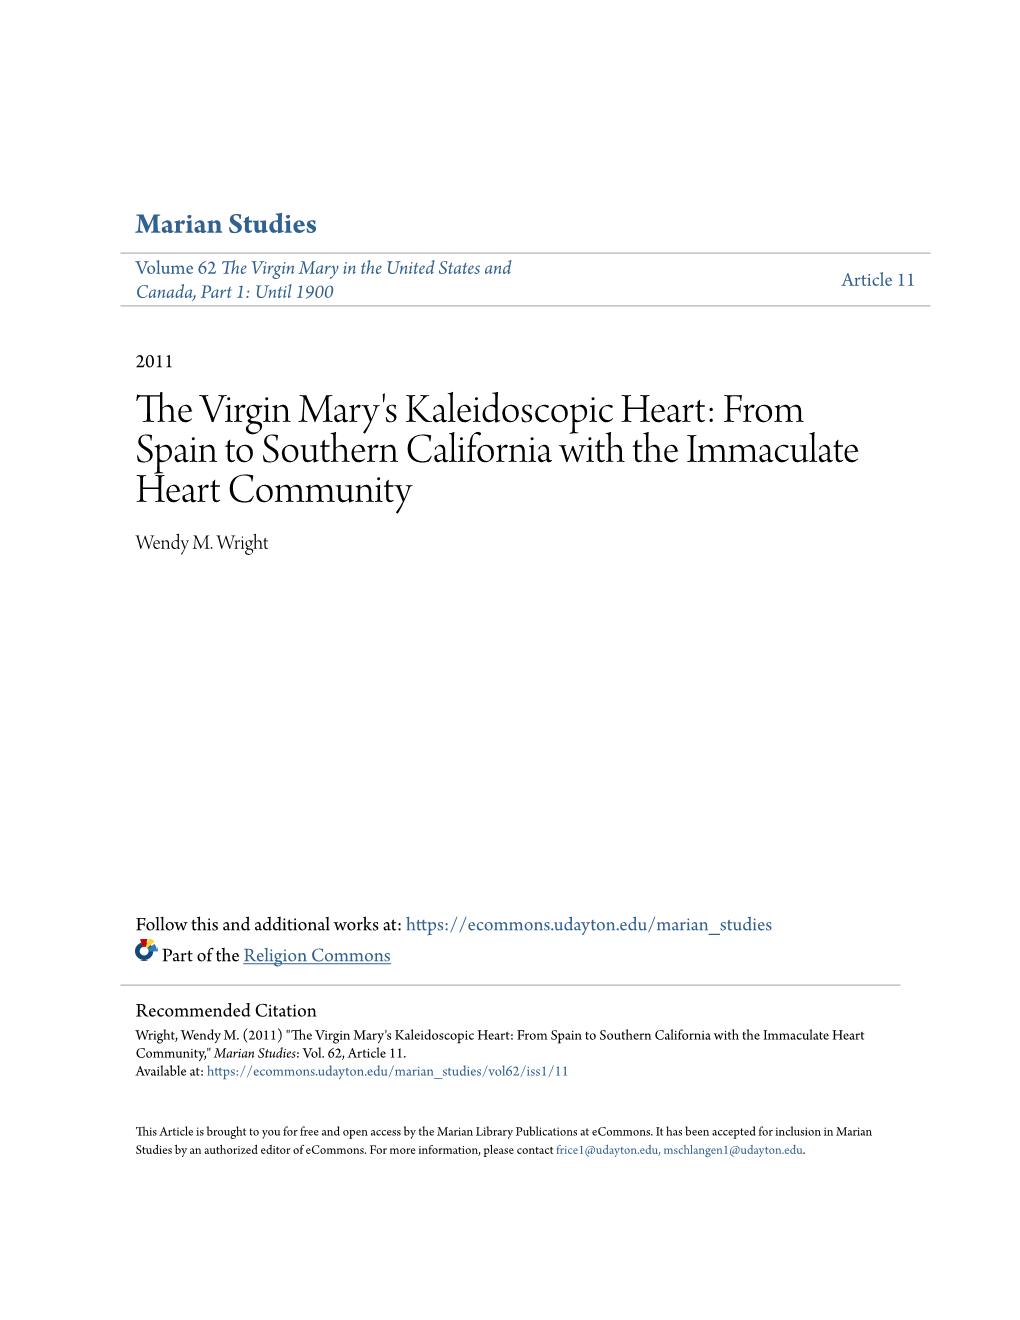 The Virgin Mary's Kaleidoscopic Heart: from Spain to Southern California